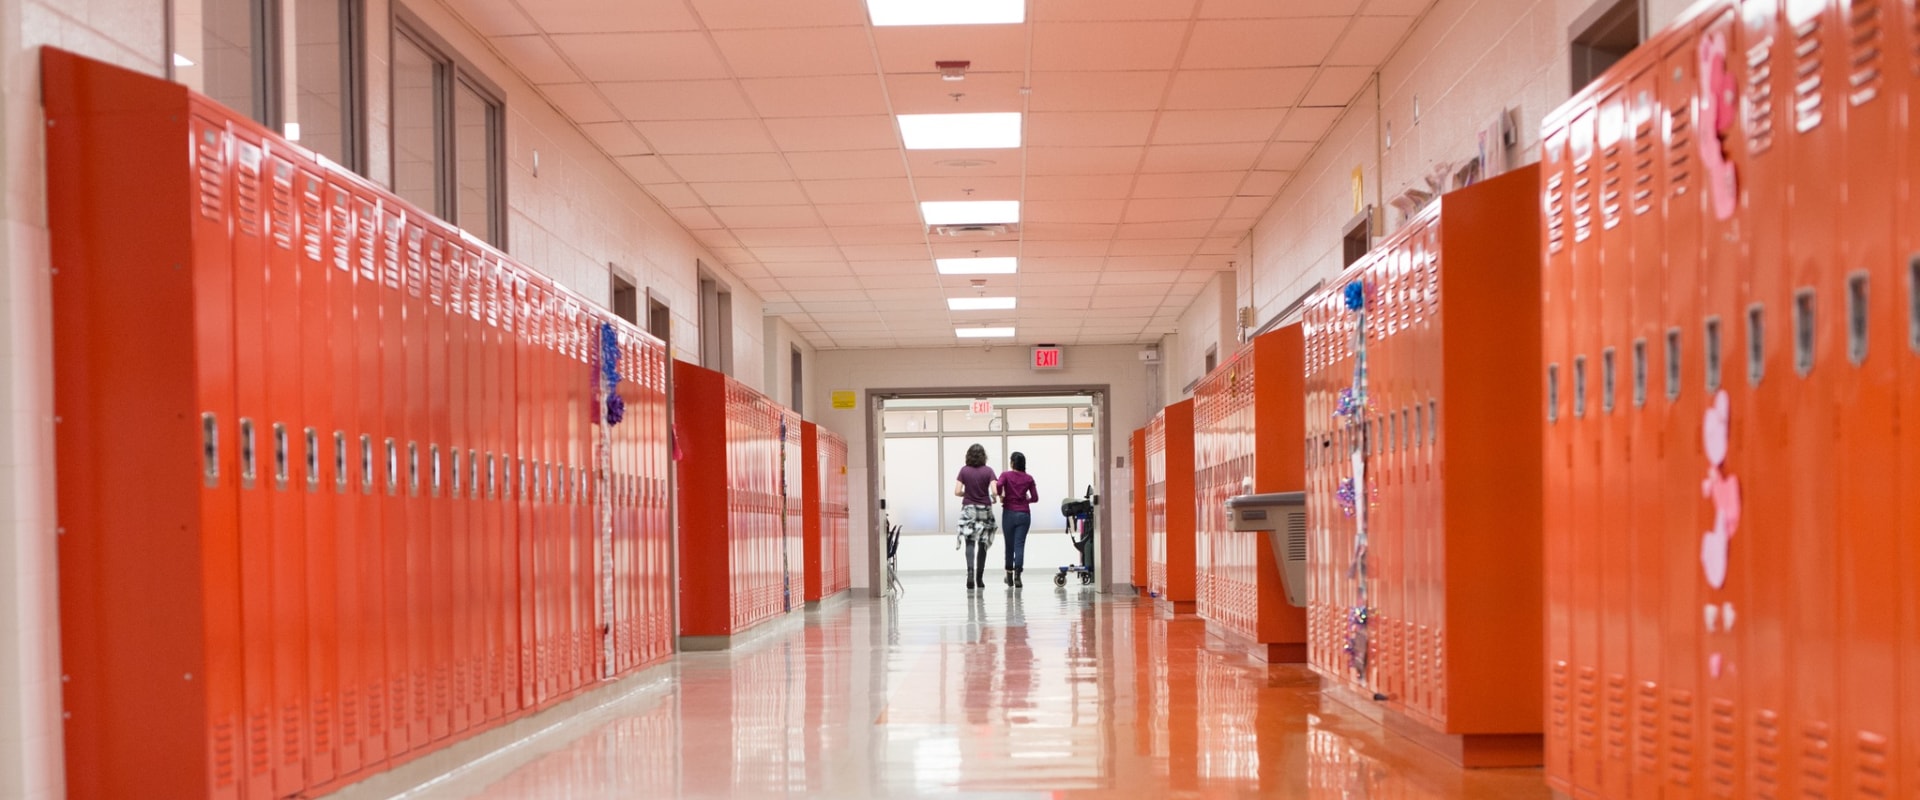 Understanding the Policy for Responding to Vandalism on School Grounds in Dulles, Virginia